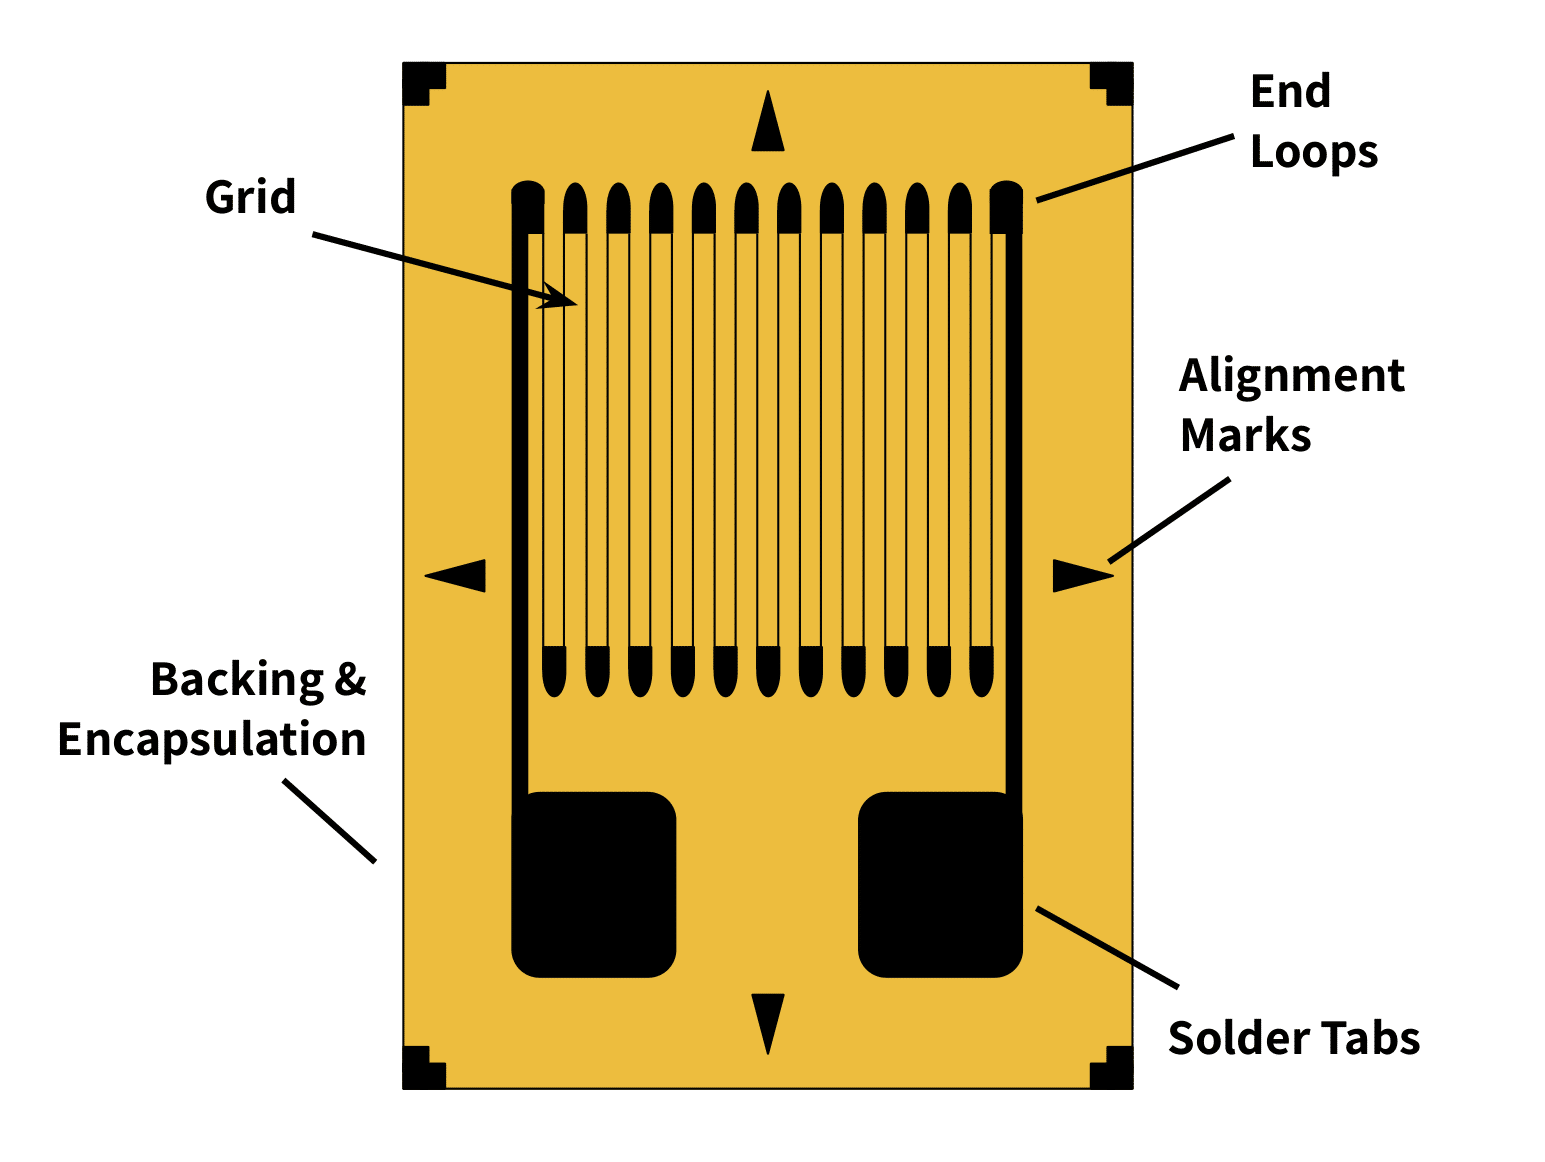 a schematic of a strain gauge which is a vertically oriented orange rectangle with a black image superimposed. The image is of thin vertical lines from the top to halfway down the orange rectangle connected at the tops and bottoms with filled in arched shapes, to form a delicate zig-zag. The outermost vertical lines are about four times the width of the internal lines and are terminated below the zig-zag by smaller black rectangles with rounded corners oriented vertically at the bottom of the orange rectangle.